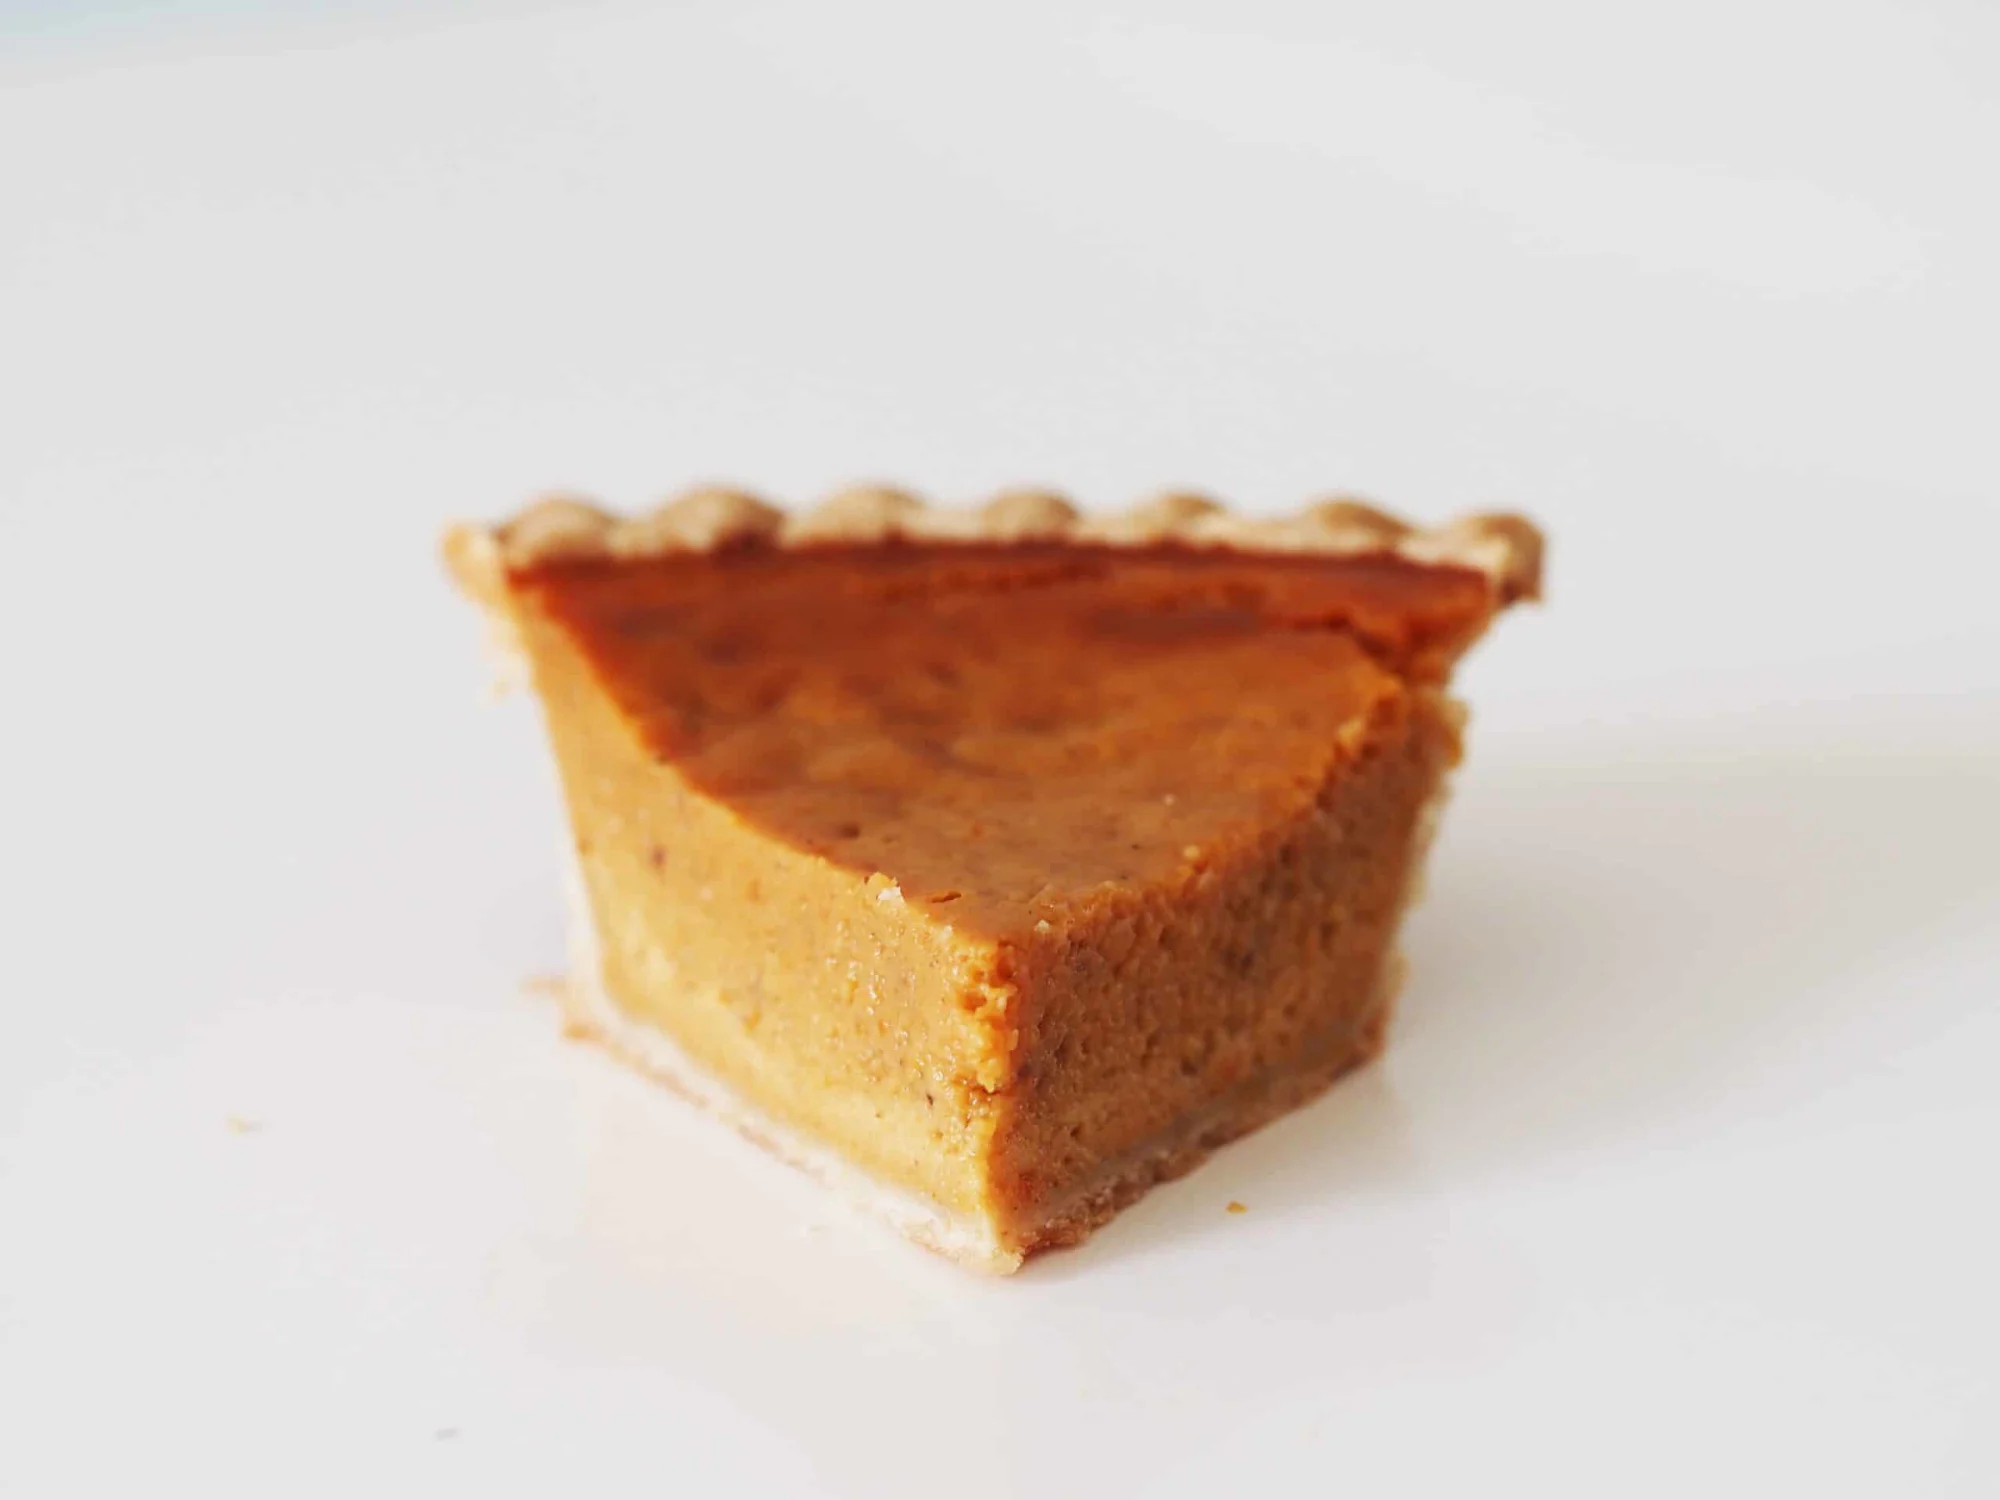 a slice of pumpkin pie before being prepared for babies starting solids